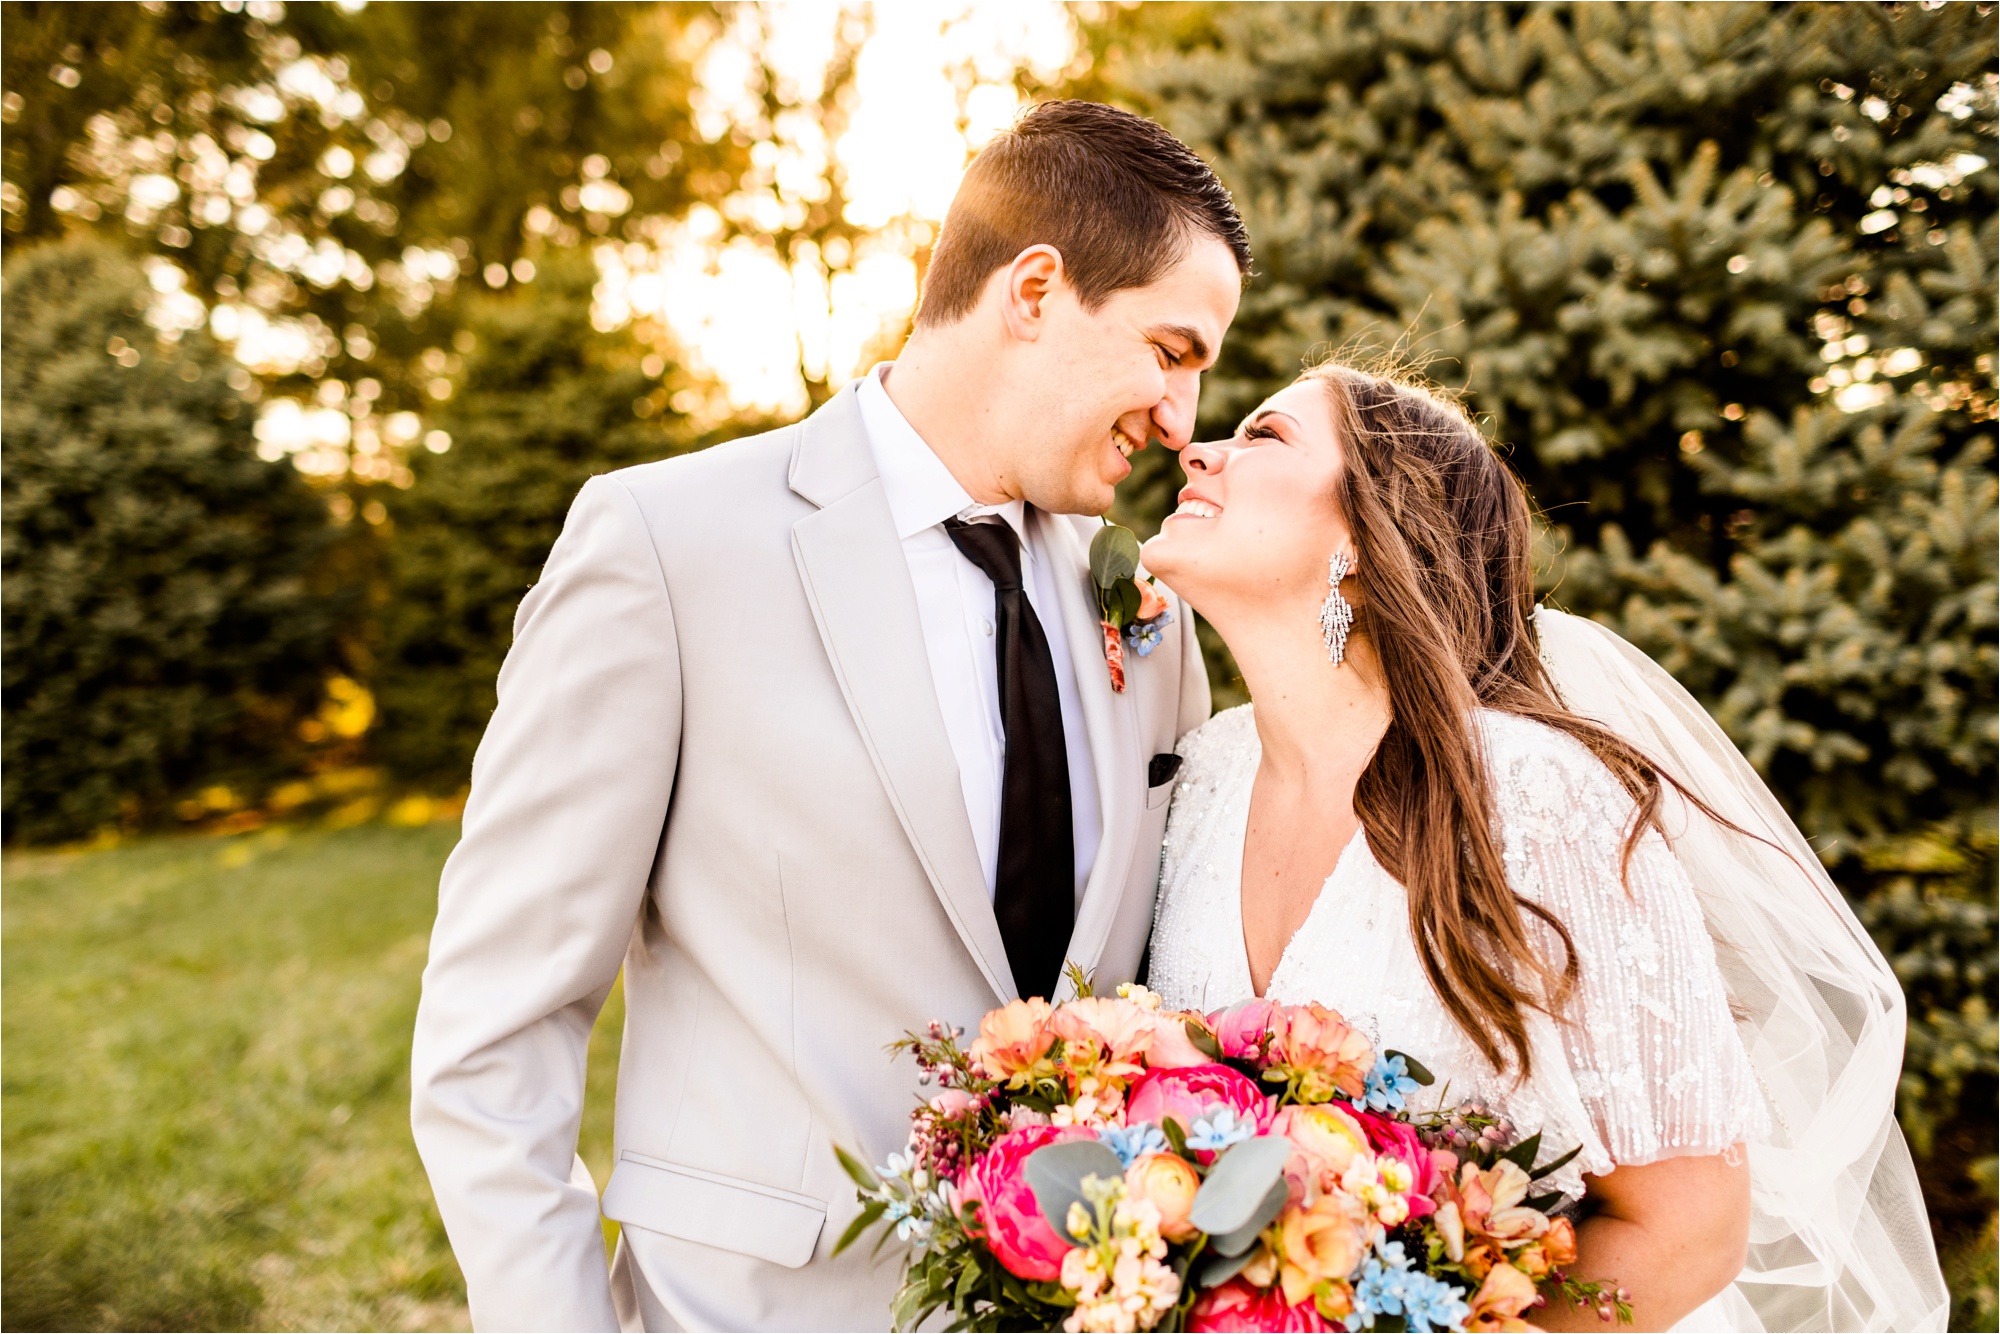 Caitlin and Luke Photography, Illinois Wedding Photographers, Champaign Wedding Photographers, Bloomington Normal Wedding Photographers, Romantic Red and Pink Sunset Styled Shoot_9571.jpg